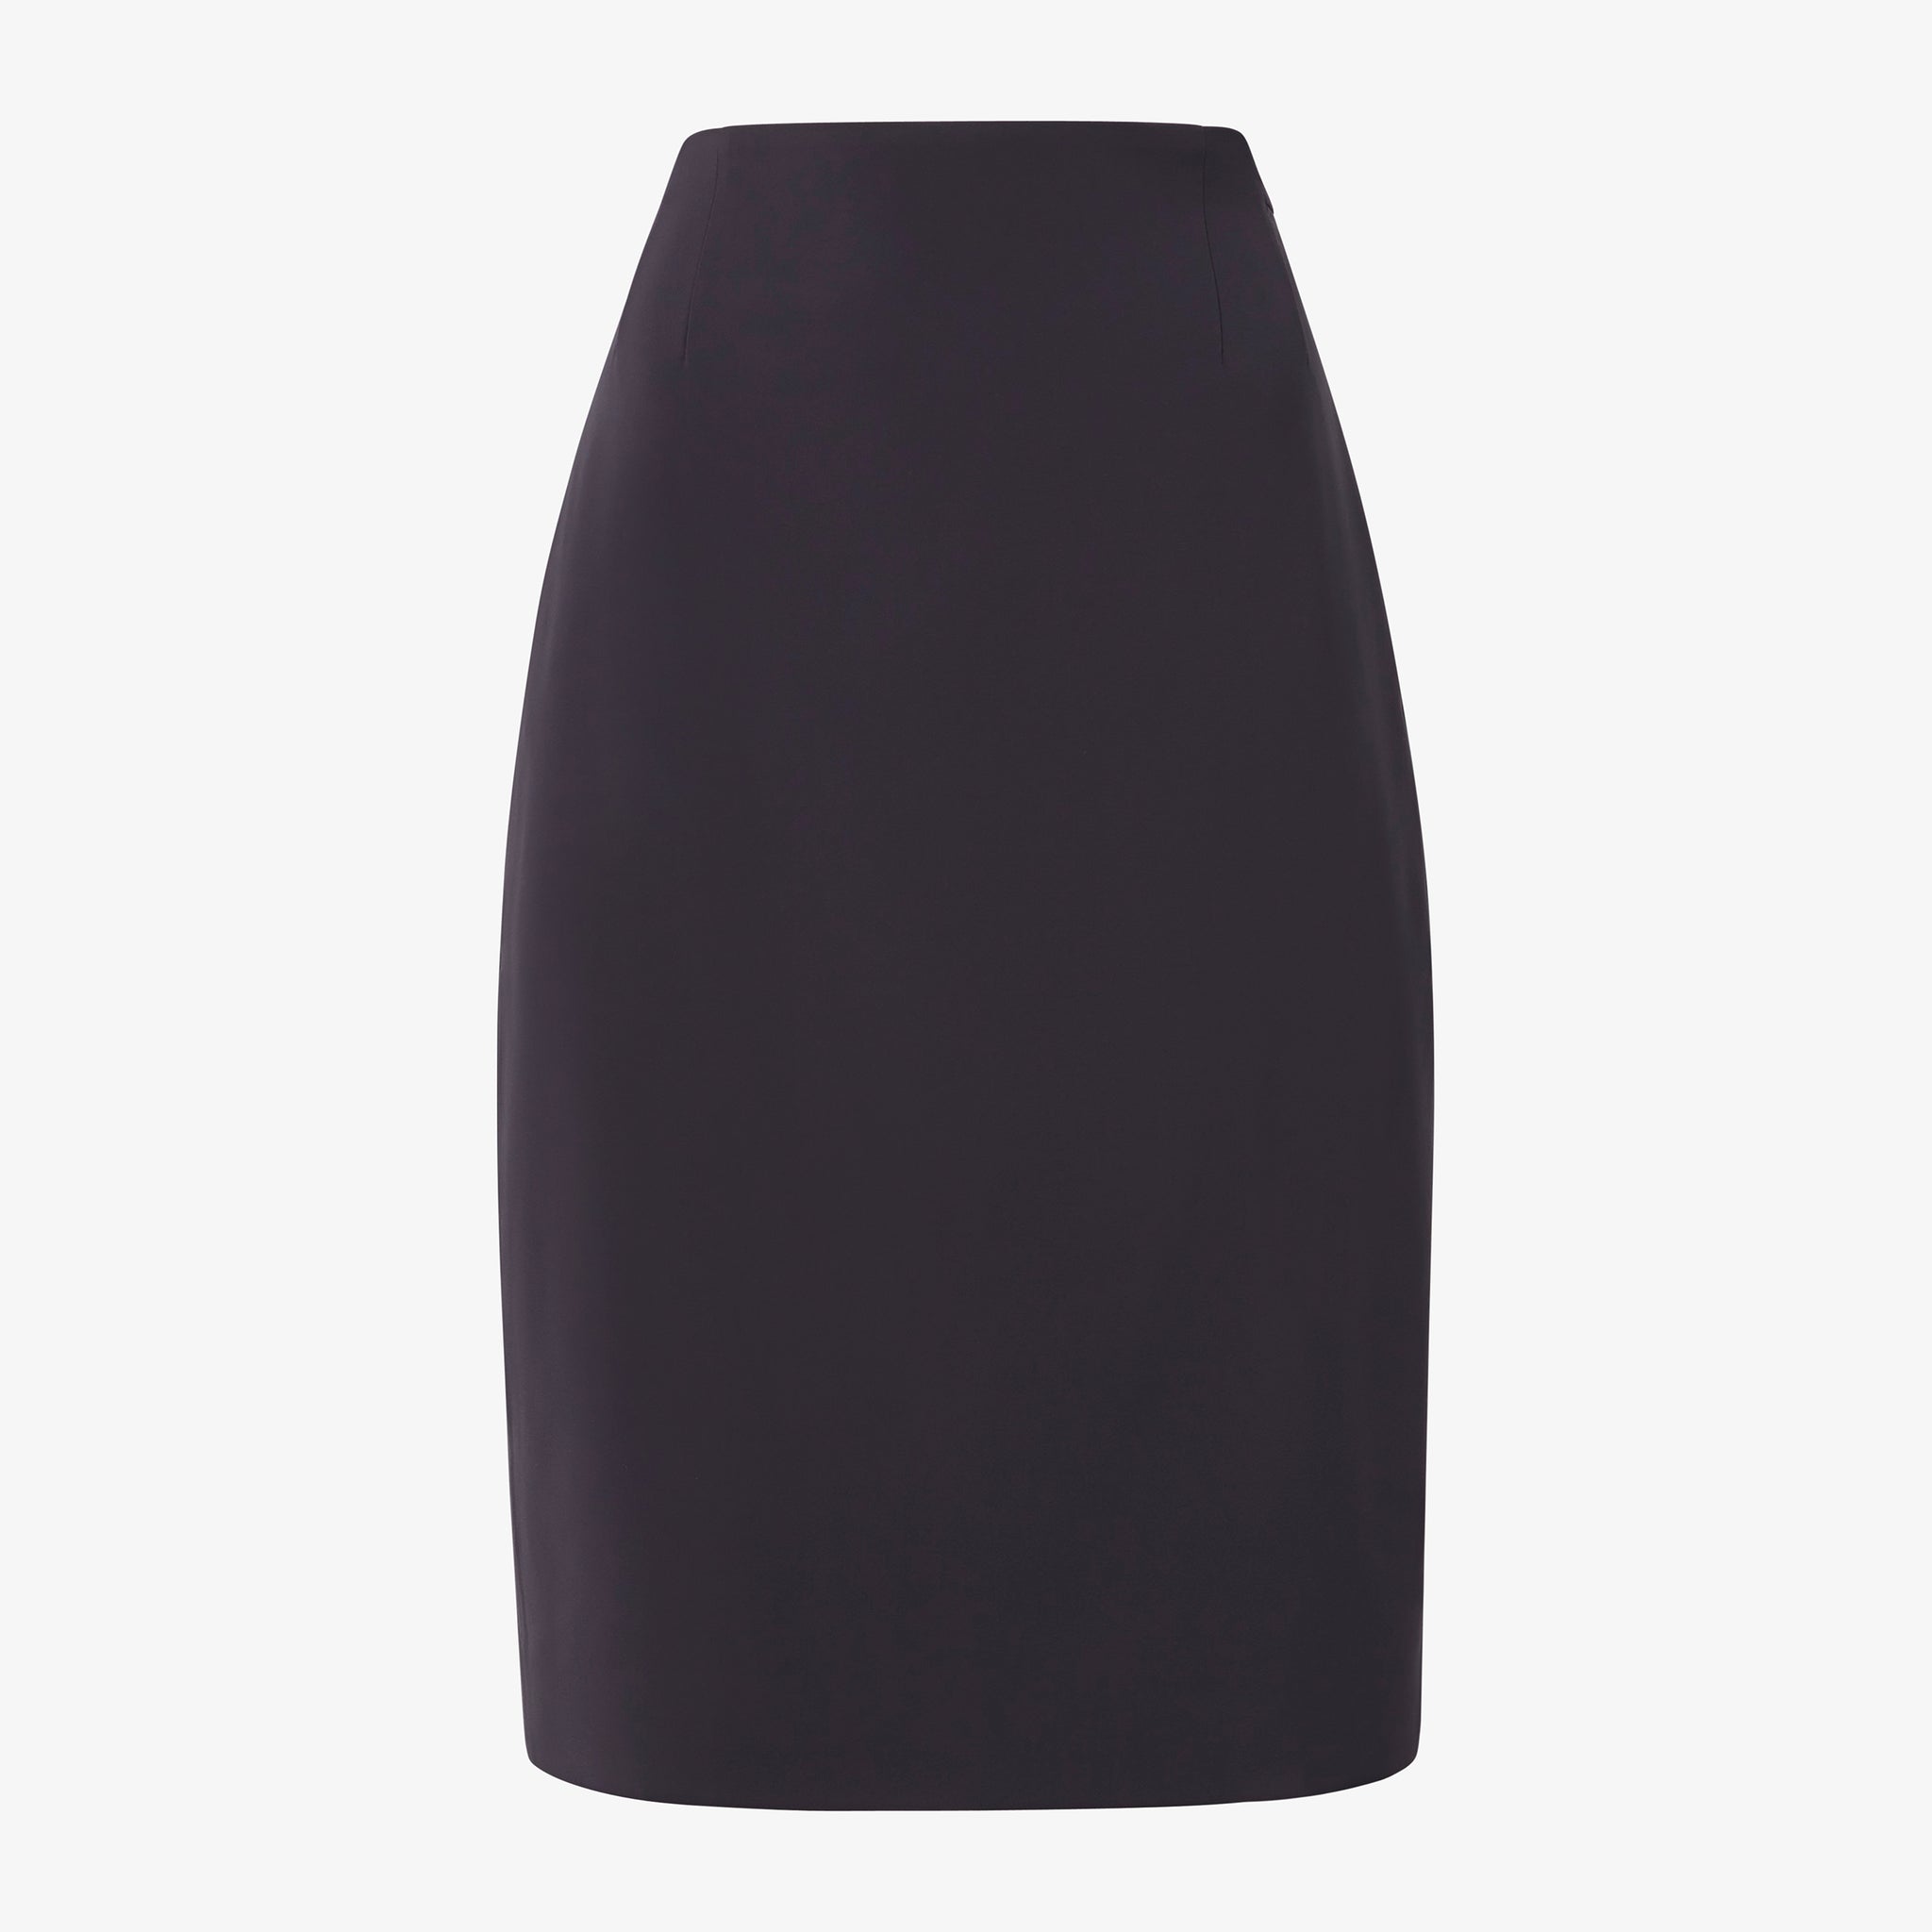 Packshot image of the Cobble Hill Skirt - OrigamiTech in Cool Charcoal